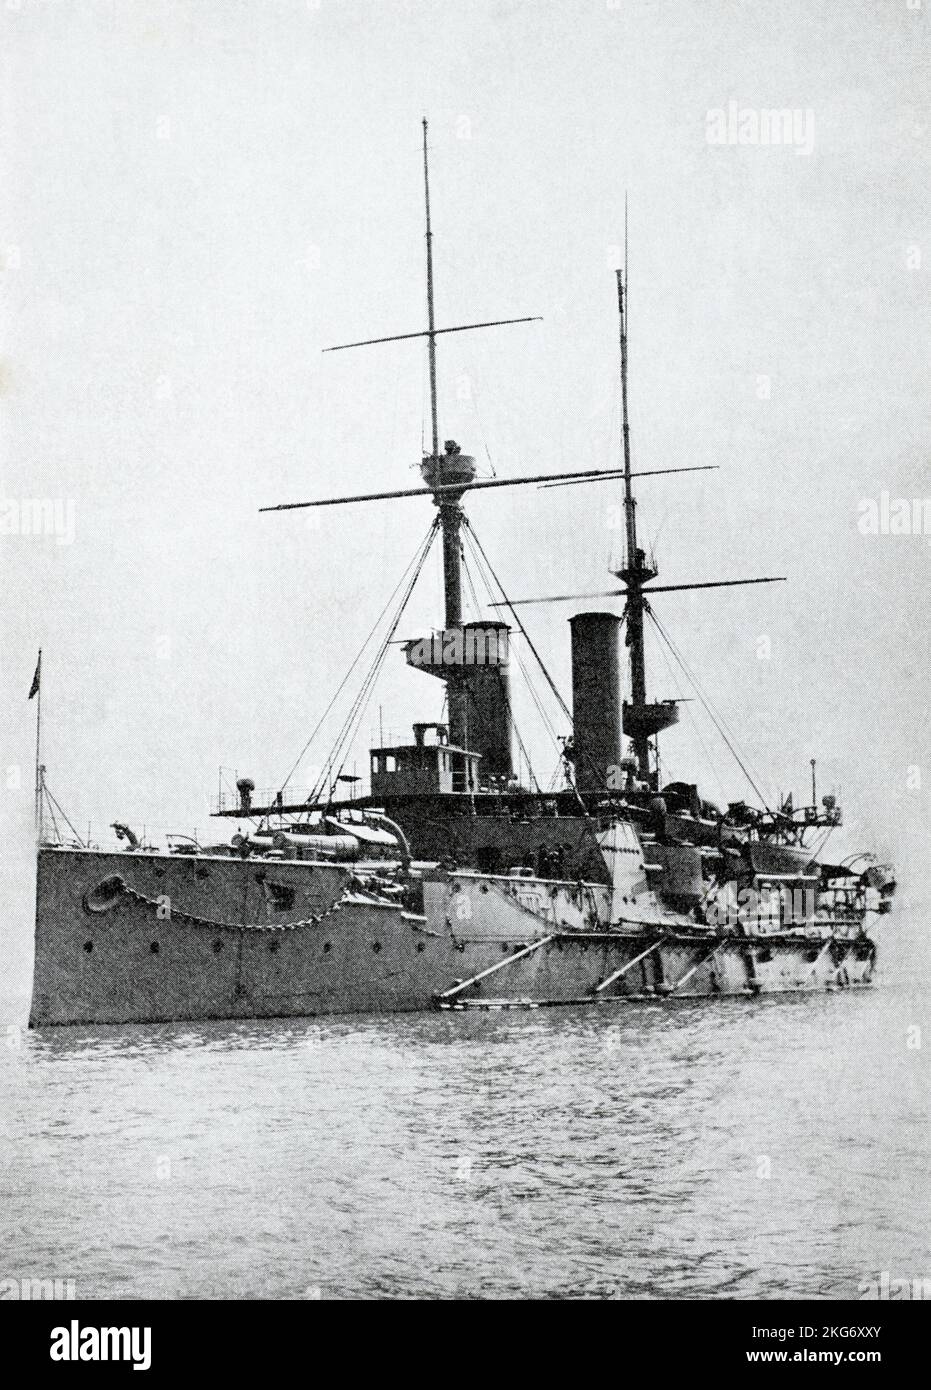 The pre-war era battleship HMS Royal Sovereign. Commissioned in 1892, it served in the Royal Navy until it was decommissioned in 1909. Stock Photo